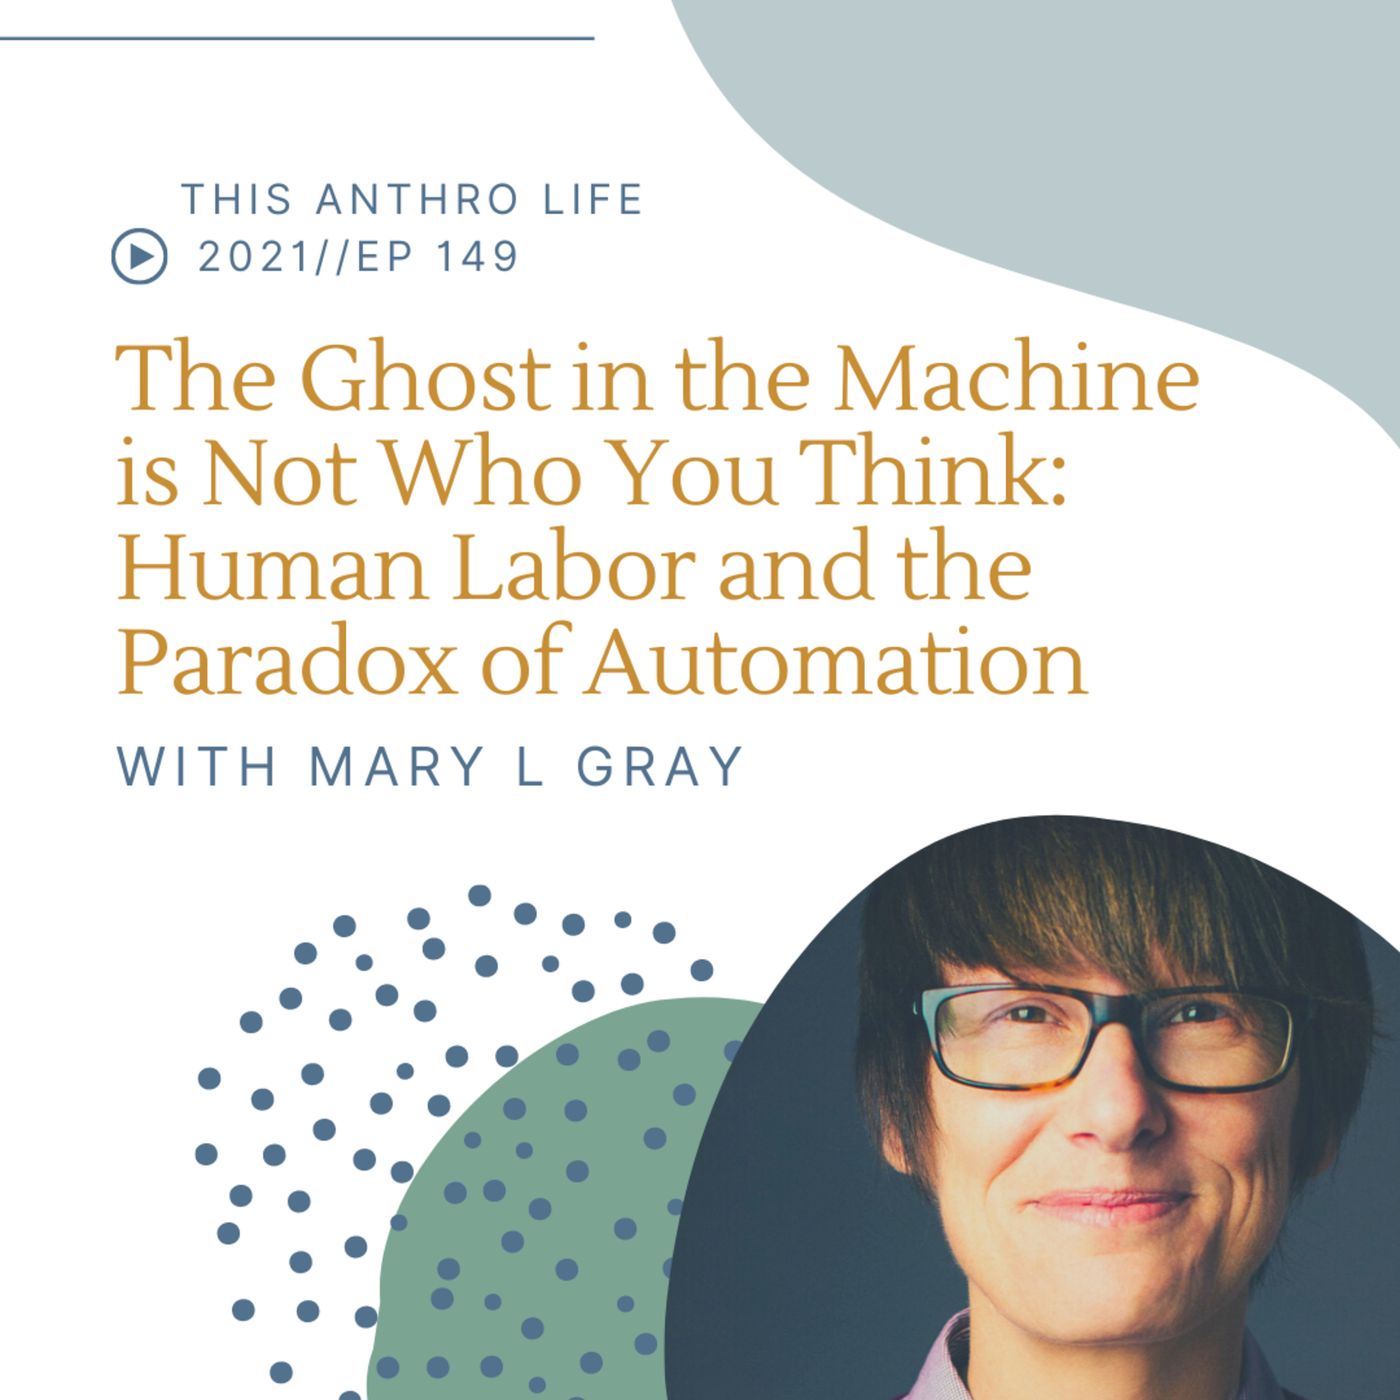 The Ghost in the Machine is Not Who You Think: Human Labor and the Paradox of Automation with Mary L Gray